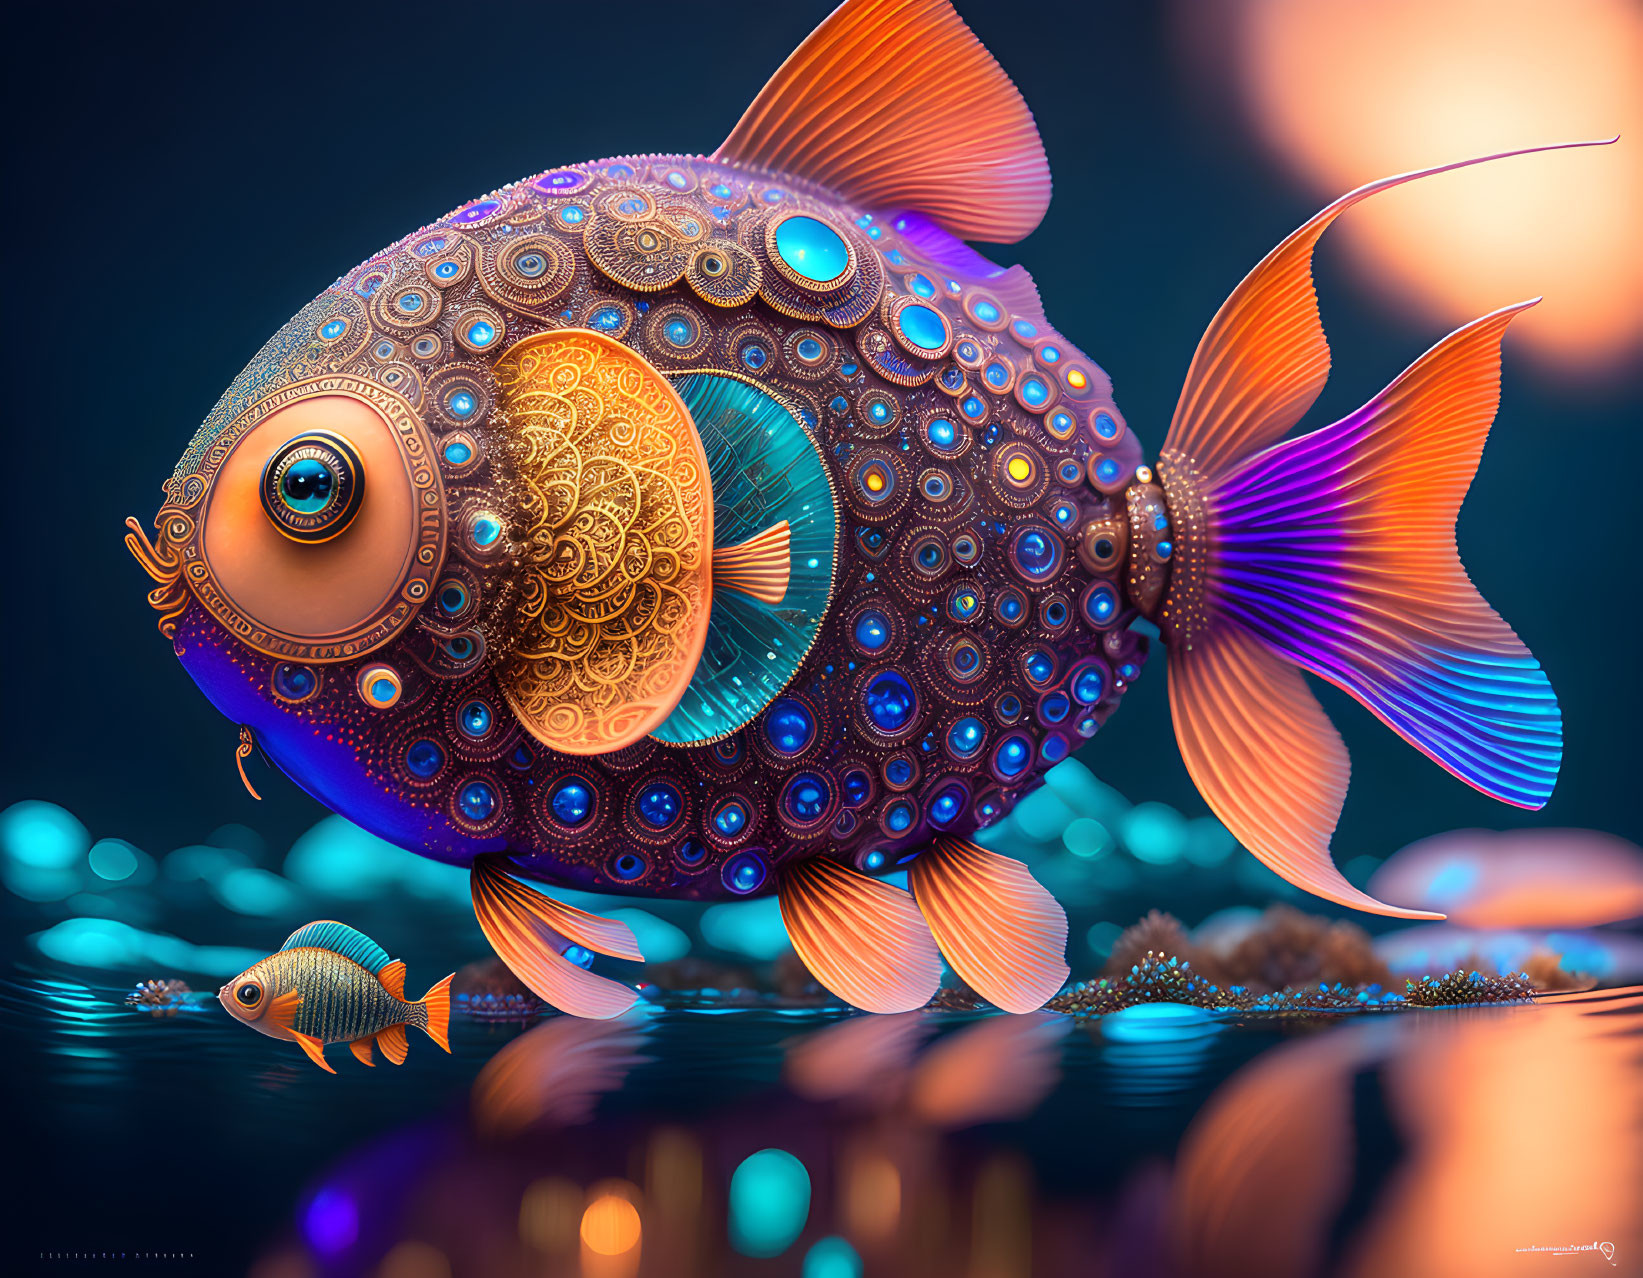 Stylized ornate fish with intricate patterns in blue underwater scene